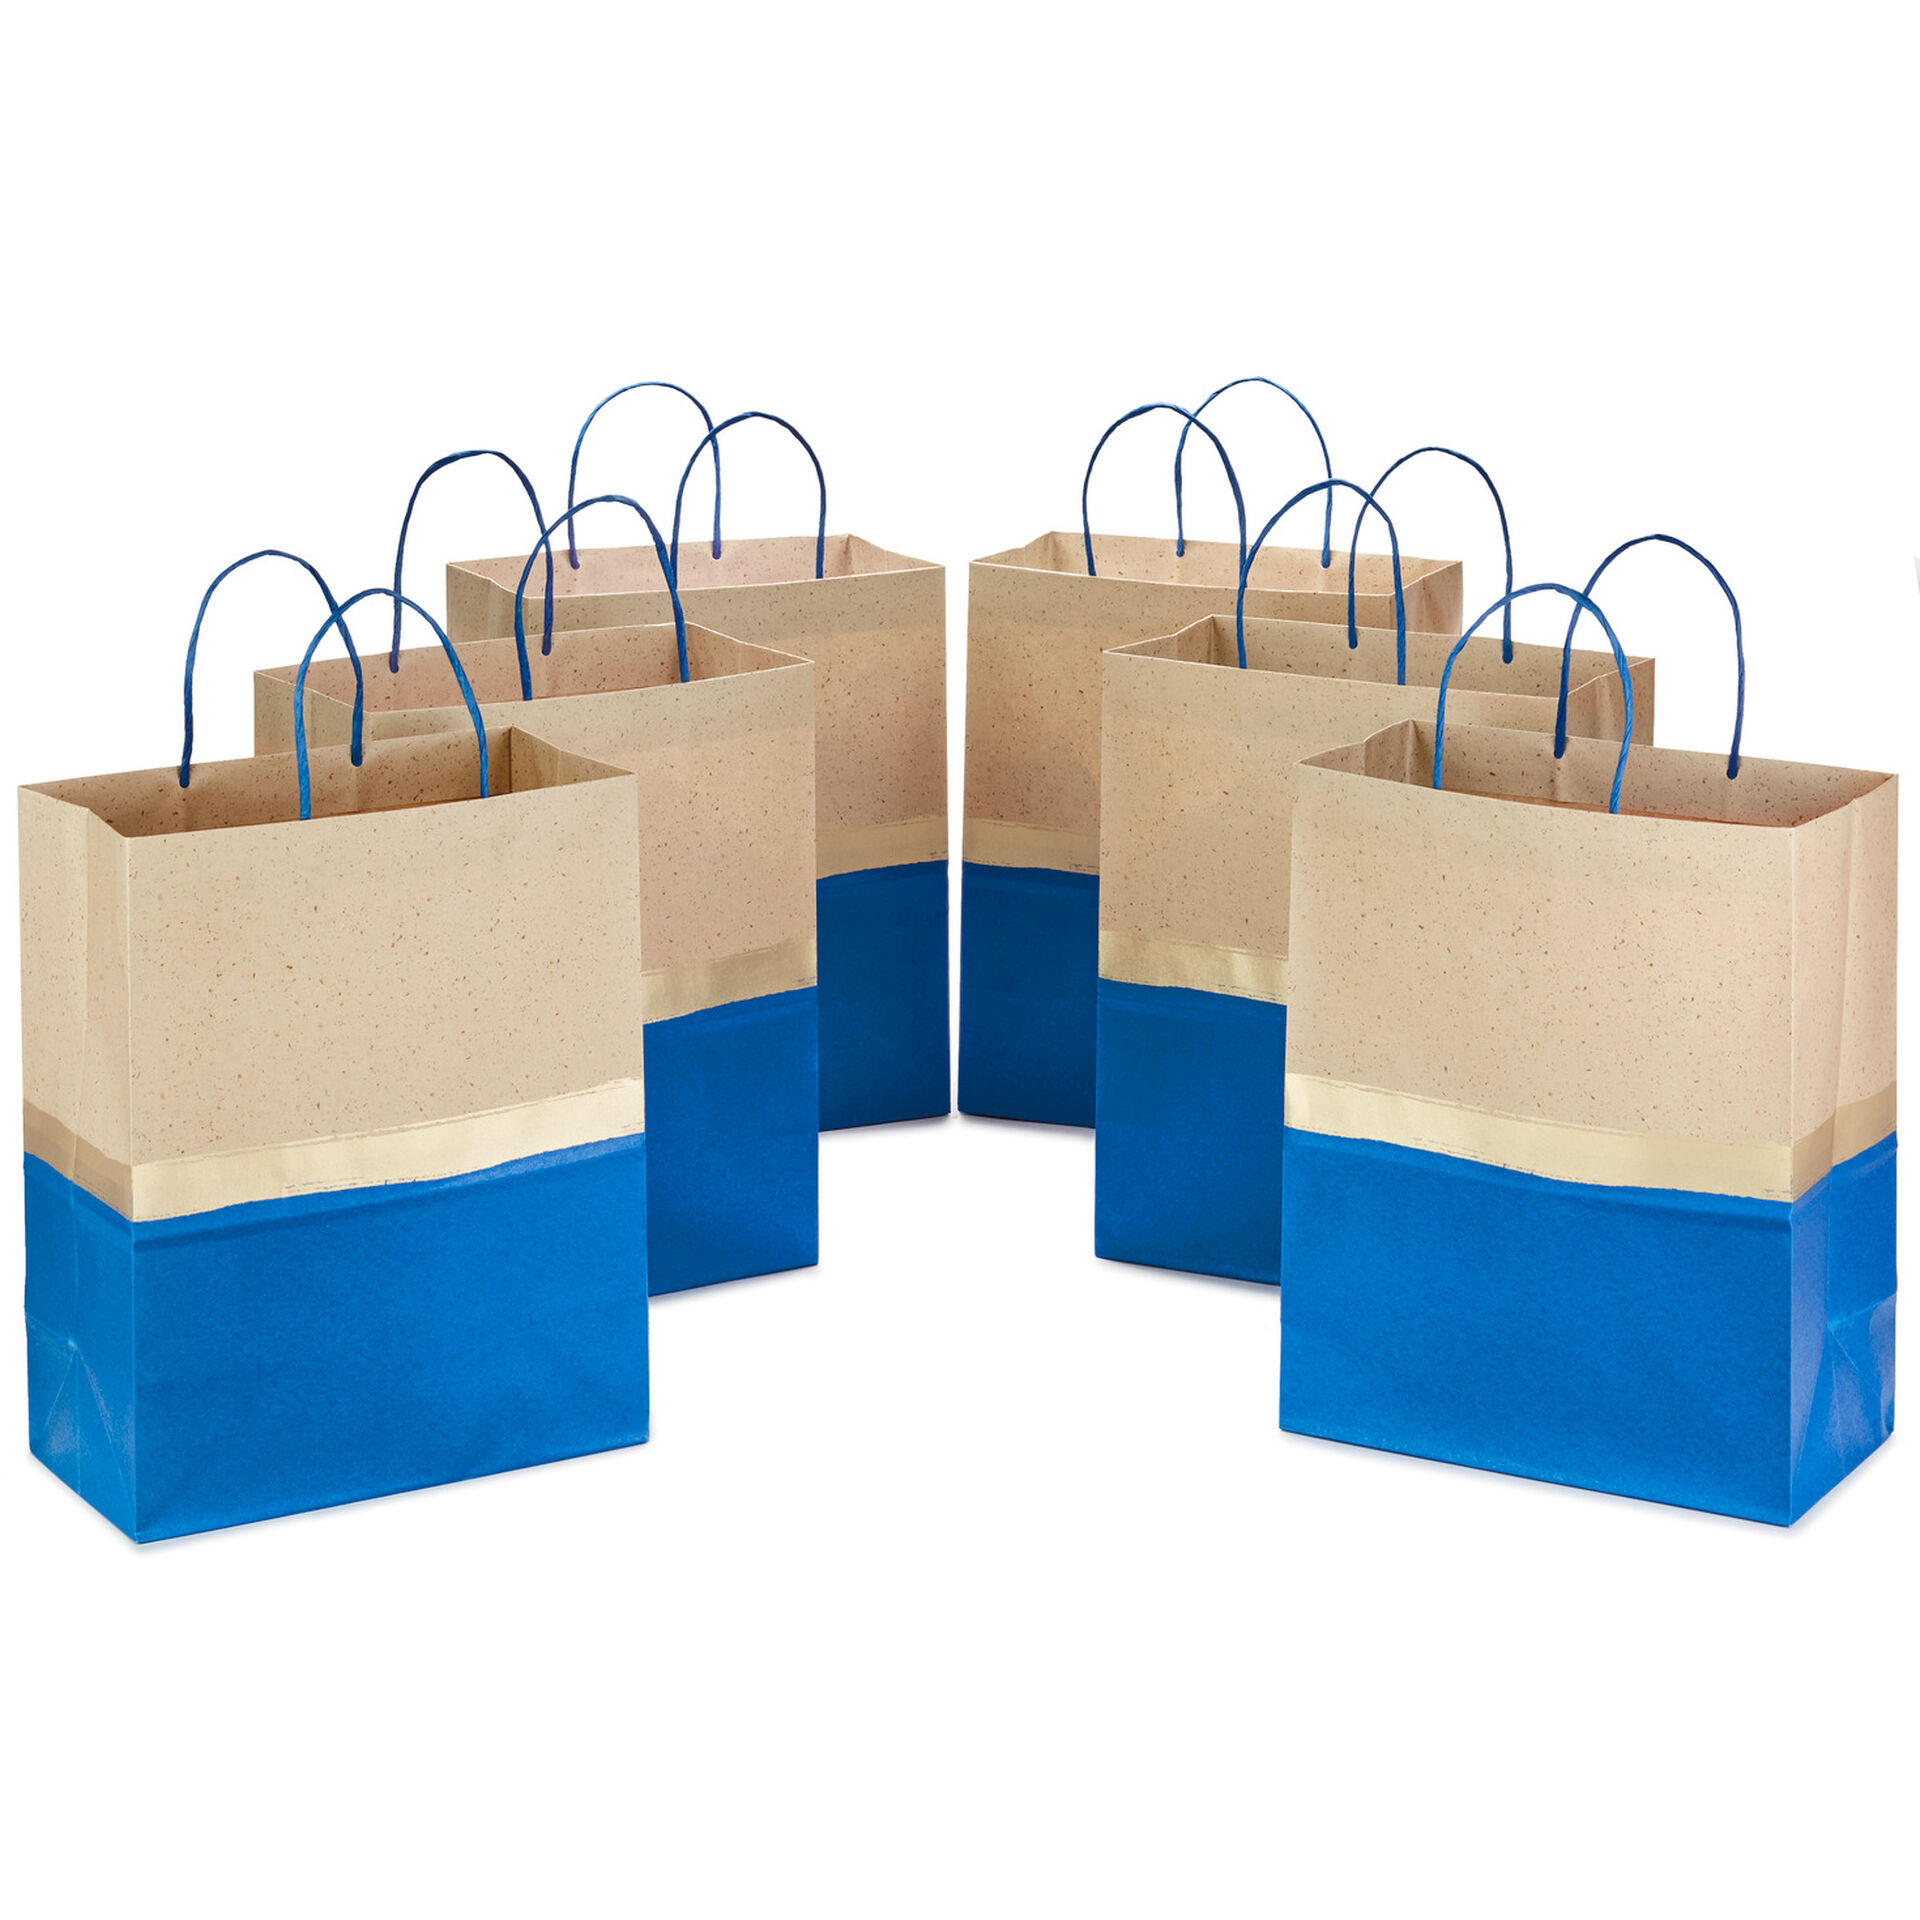 PTP 5.75 x 3.25 x 8.3 Natural Kraft Paper Gift Tote Bags Multiple Sizes Prime Time Packaging Ltd Holidays and All Occasions Weddings 250 Count| Perfect for Birthdays White or Natural Colors 